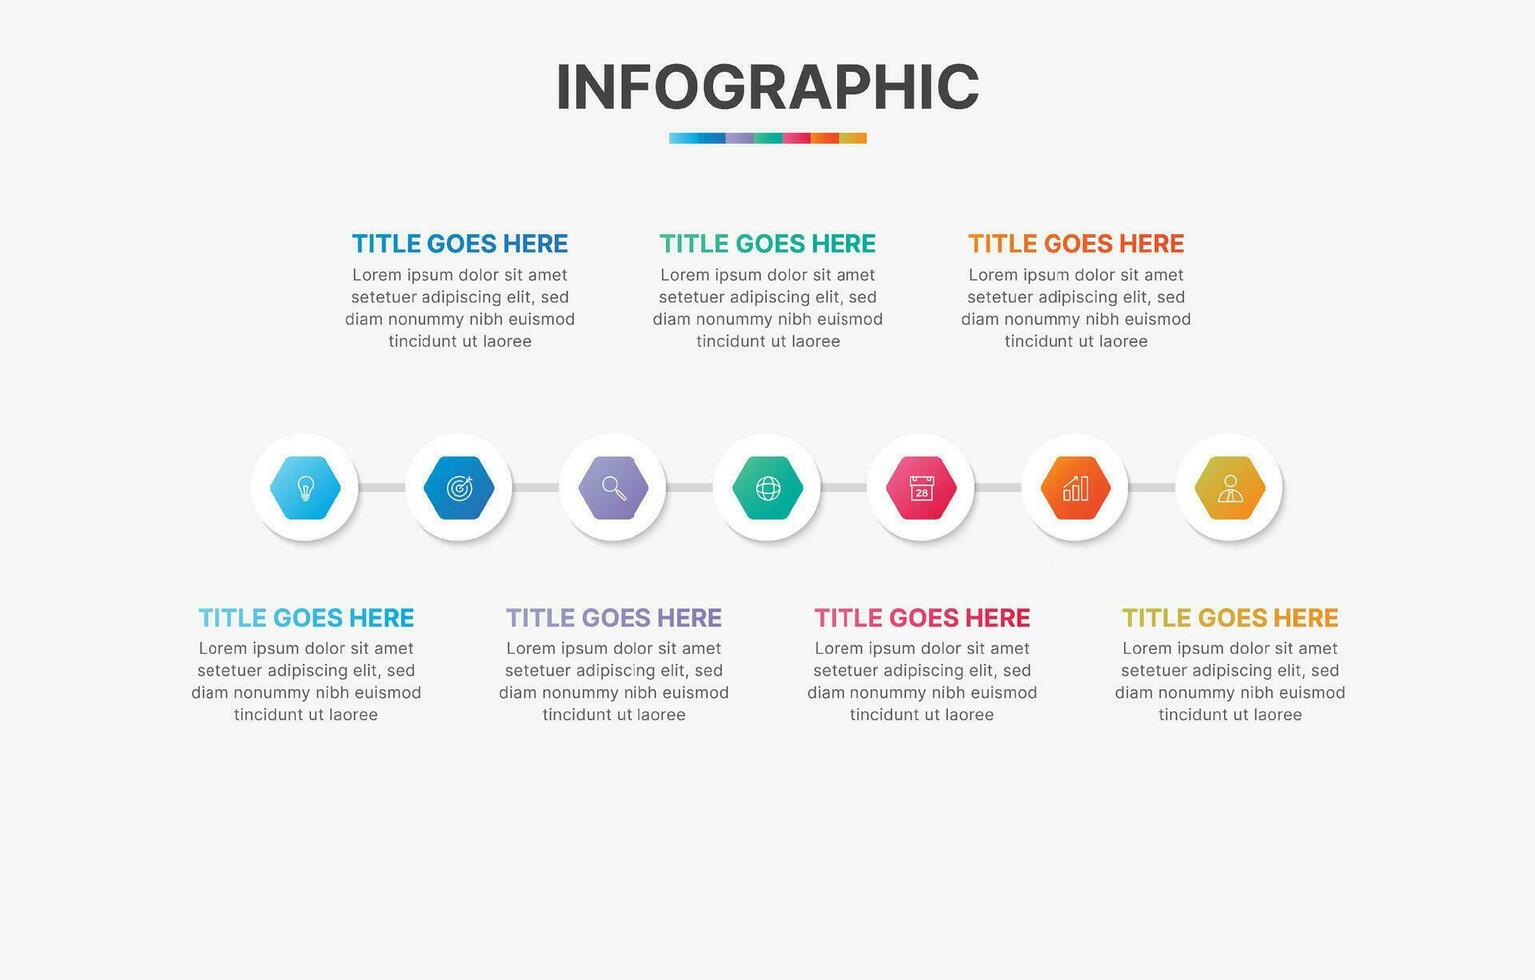 7 Steps Options Timeline Business Infographic Template Design vector